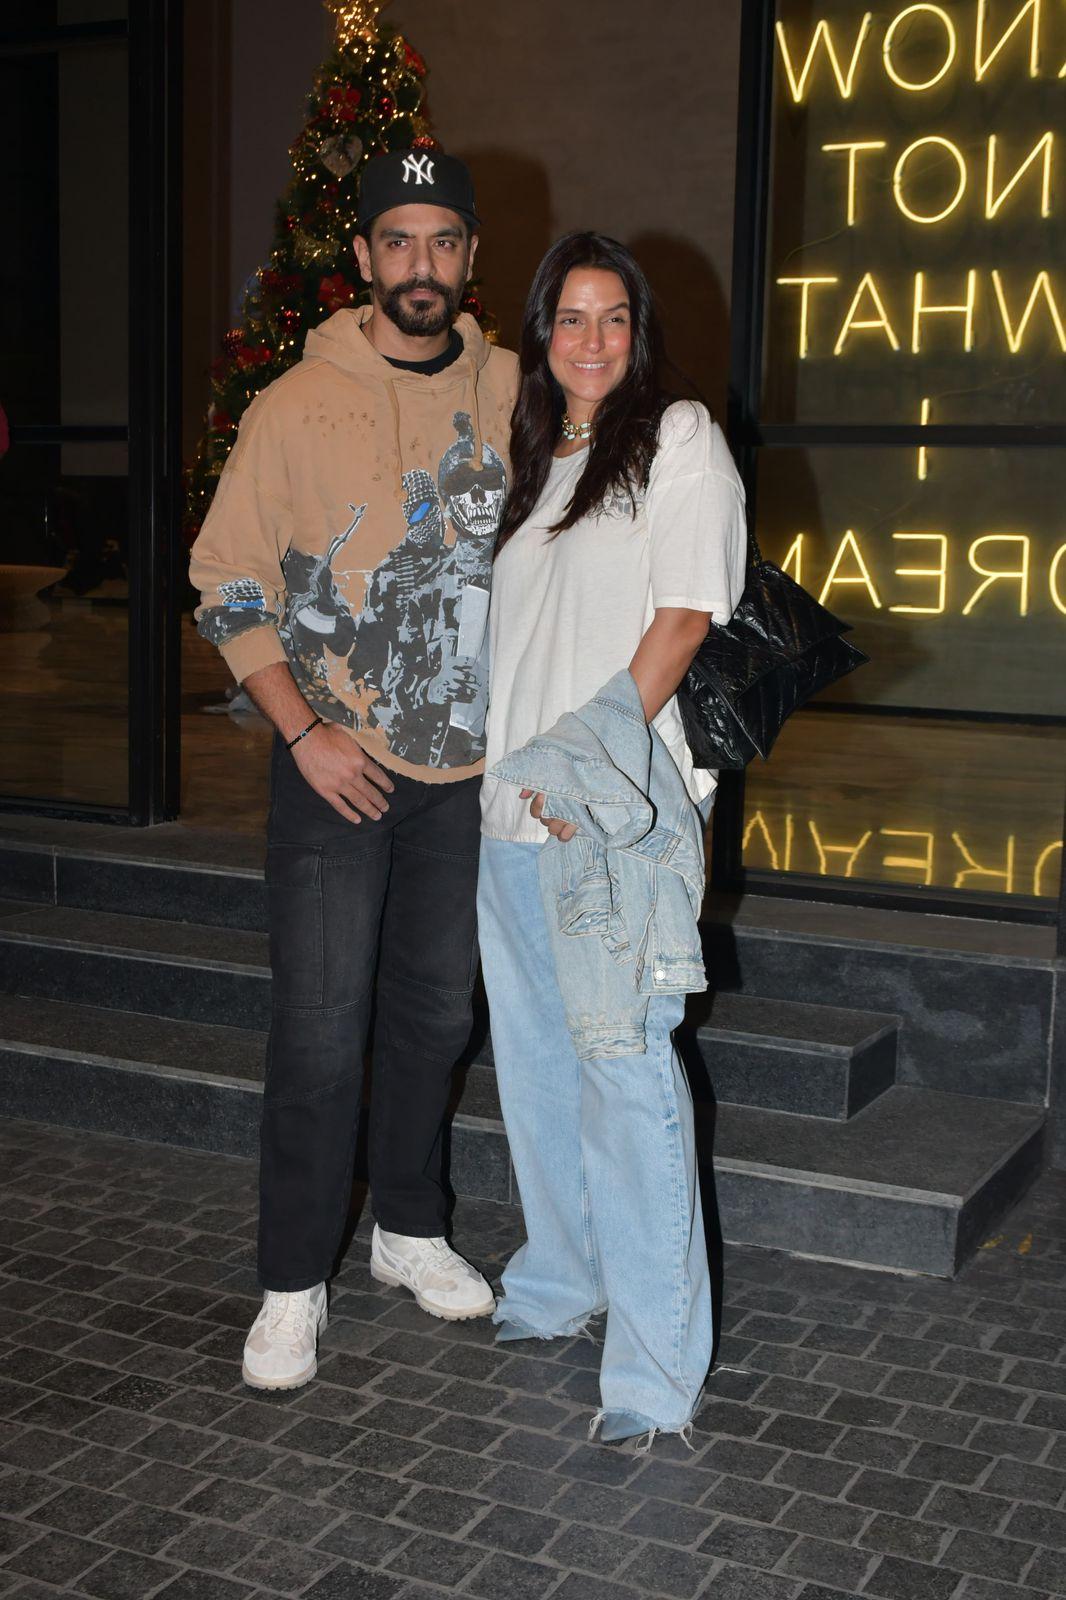 Neha Dhupia and Angad Bedi were all smiles as they posed for the paparazzi